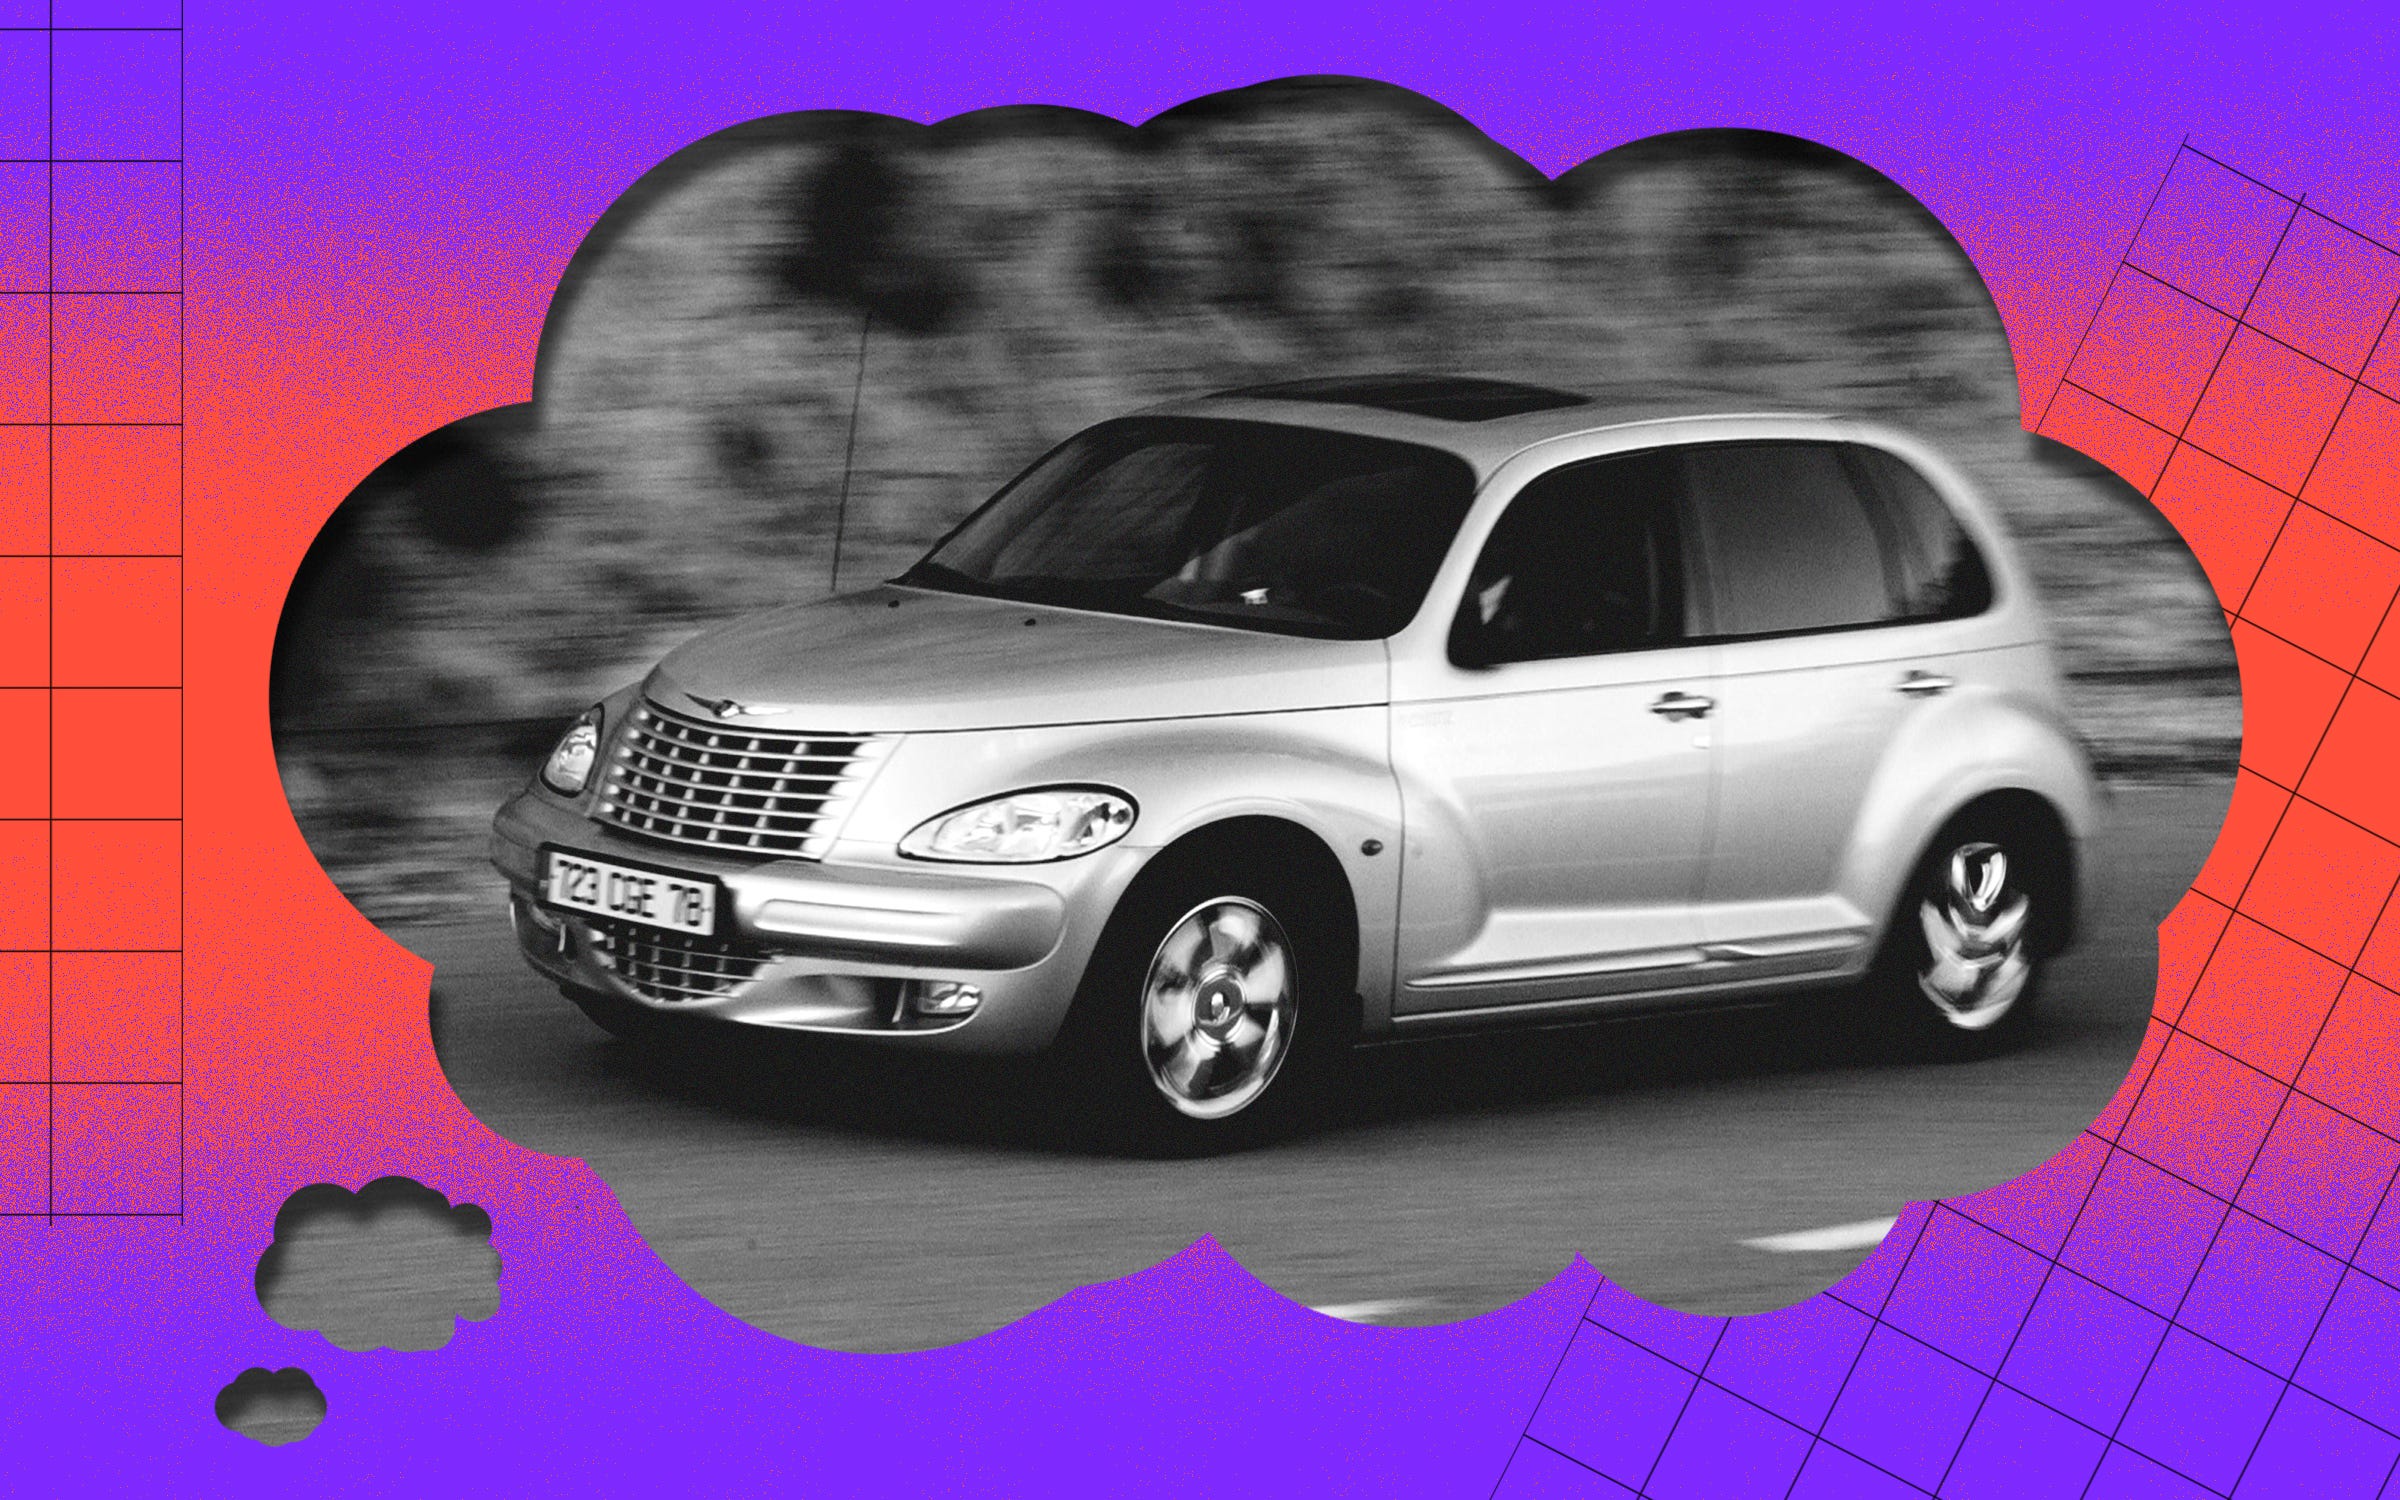 A black and white photo of a PT Cruiser photoshopped onto a thought bubble.